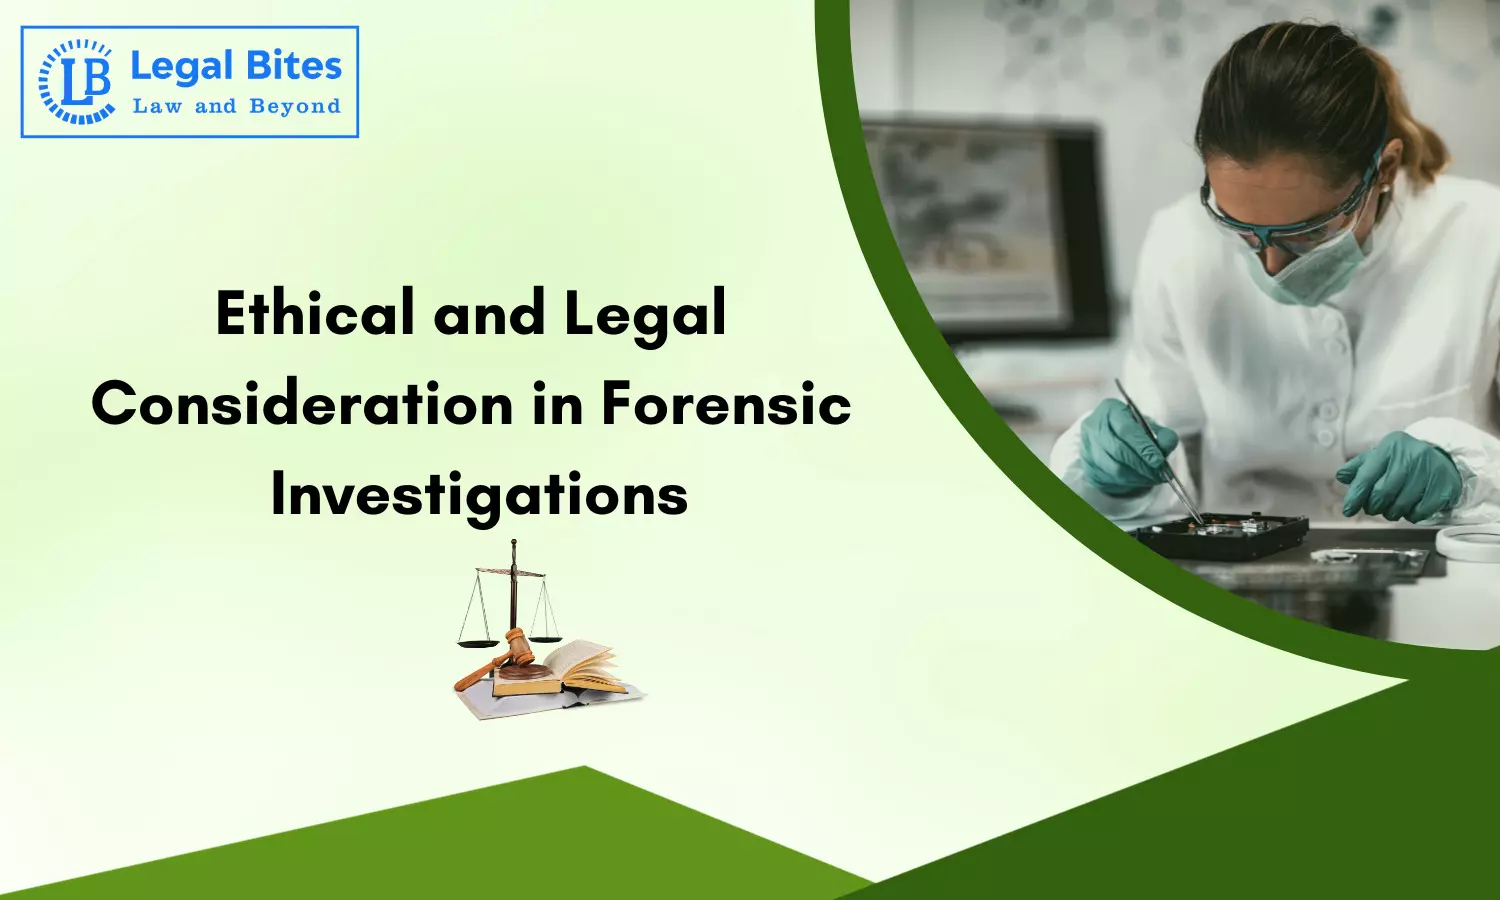 Ethical and Legal Consideration in Forensic Investigations